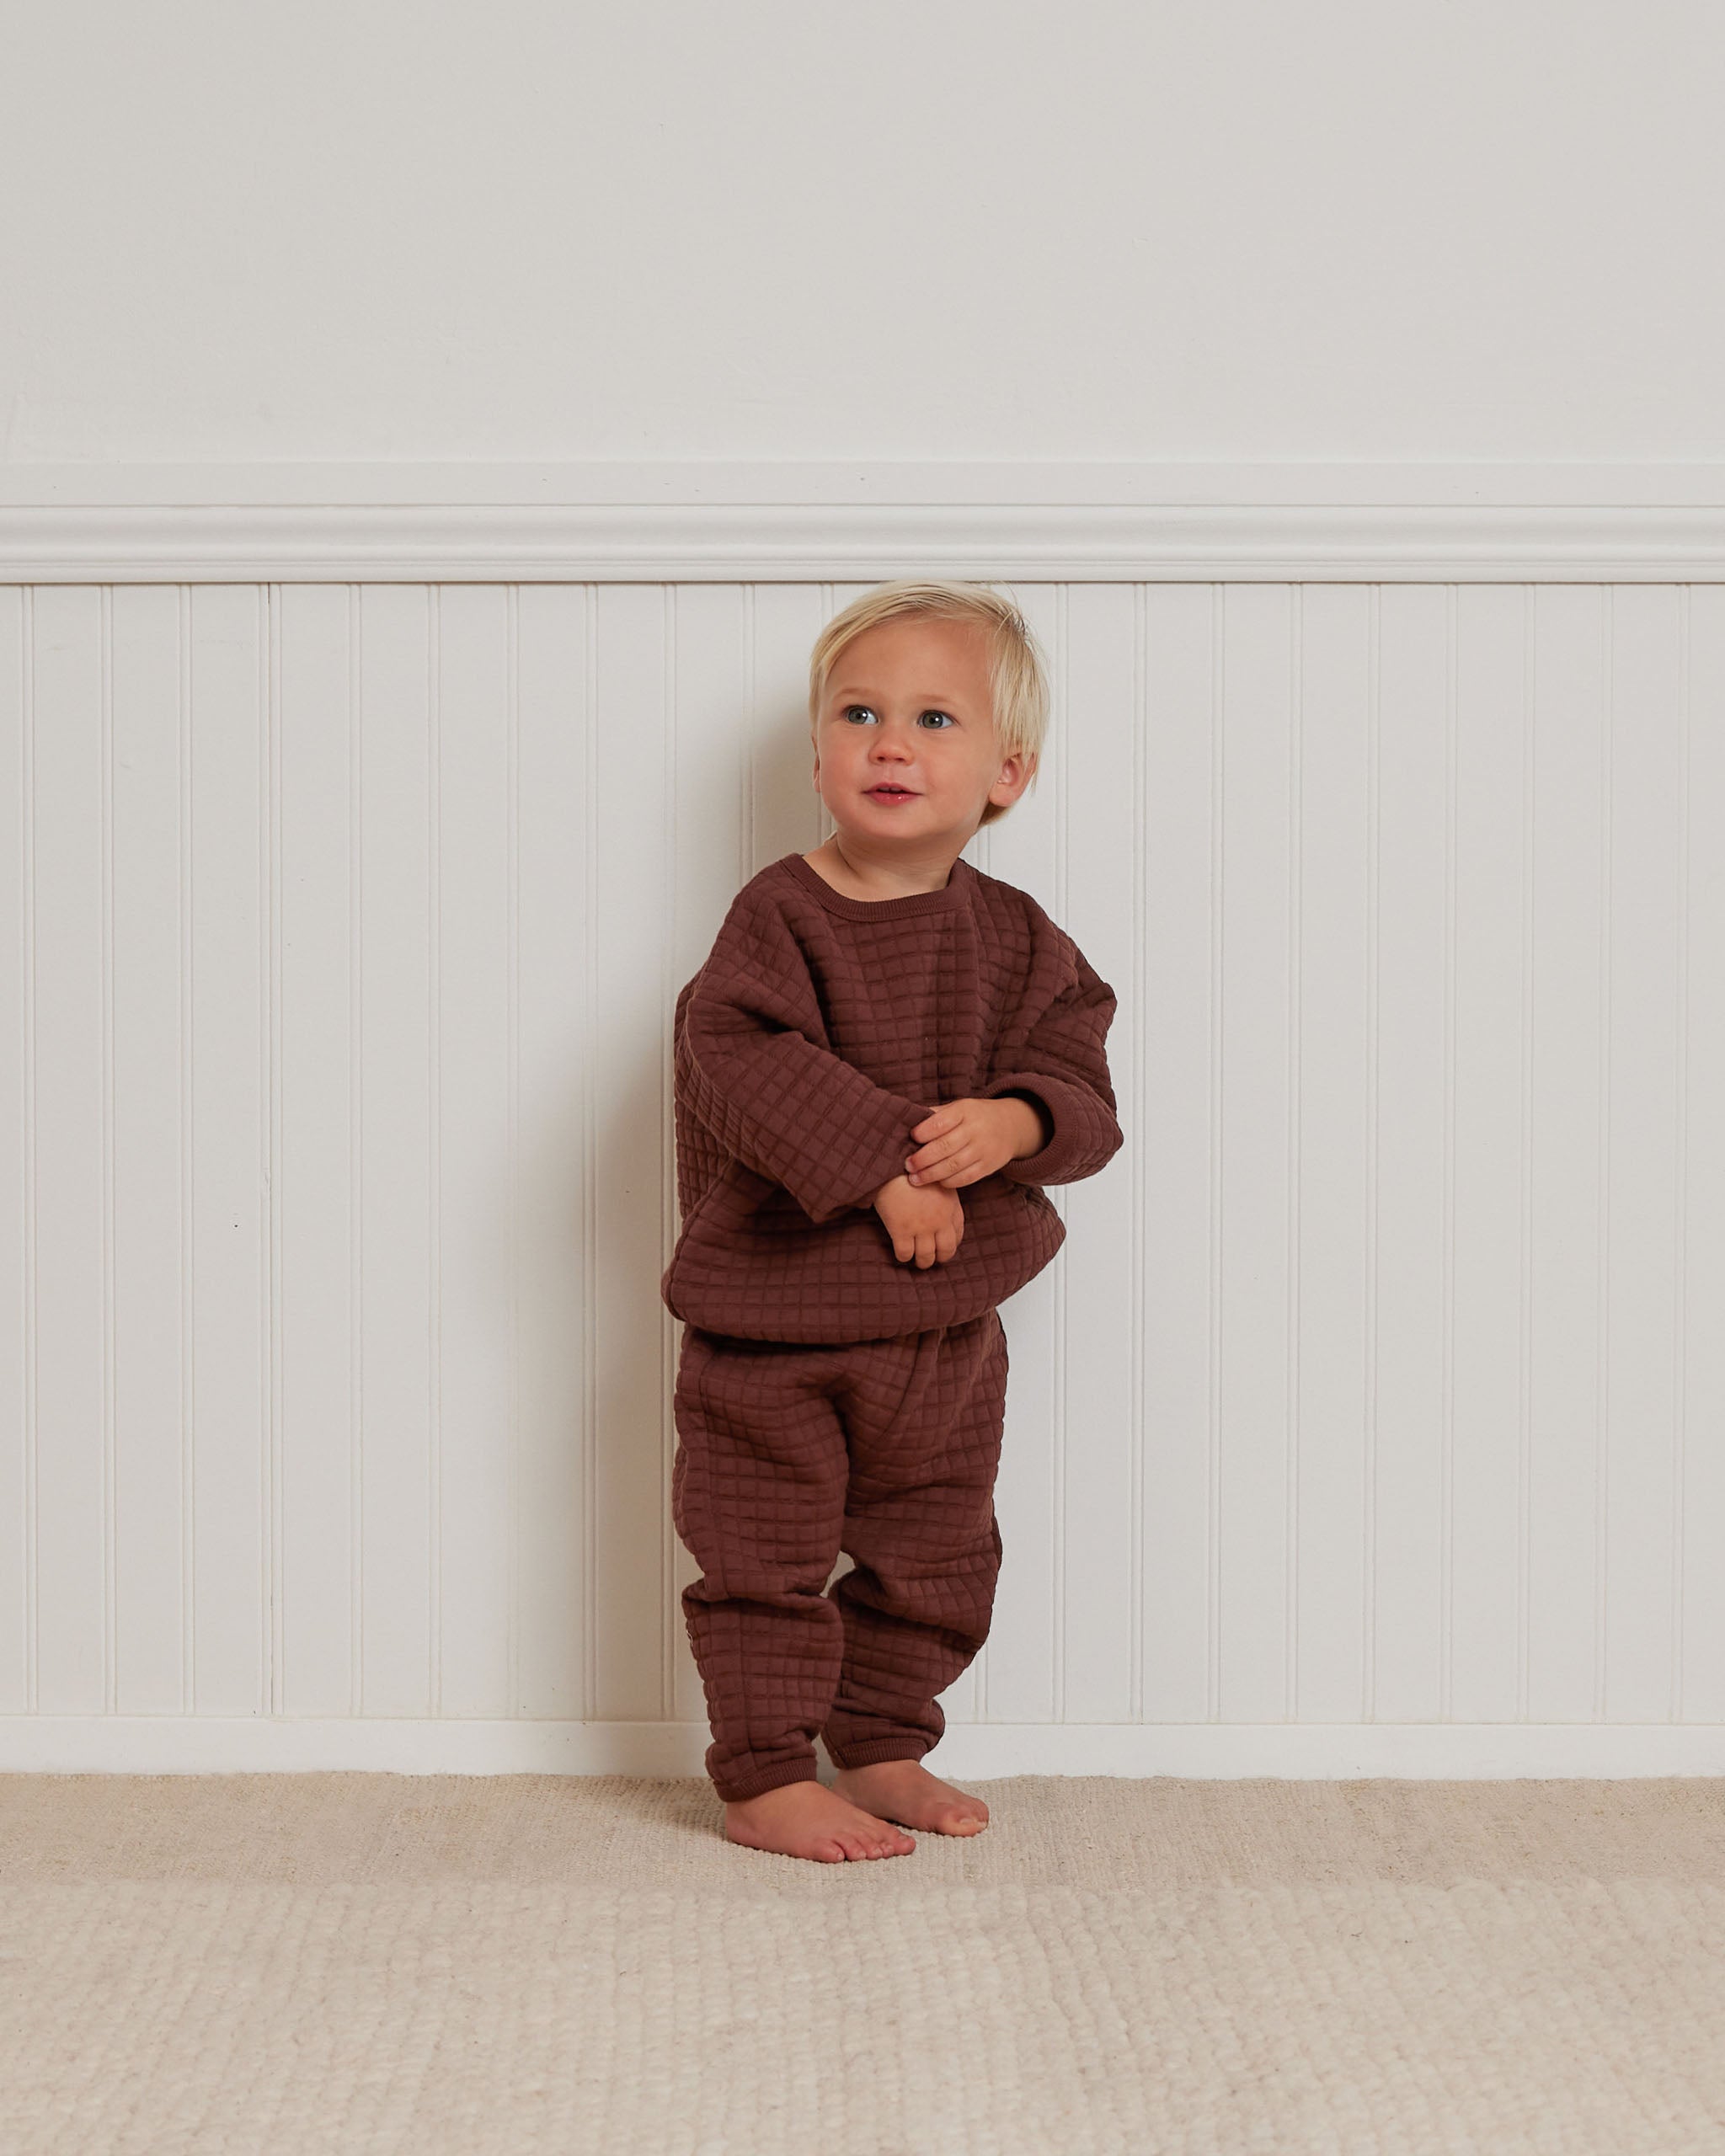 Quilted Sweater + Pant Set || Plum - Rylee + Cru | Kids Clothes | Trendy Baby Clothes | Modern Infant Outfits |